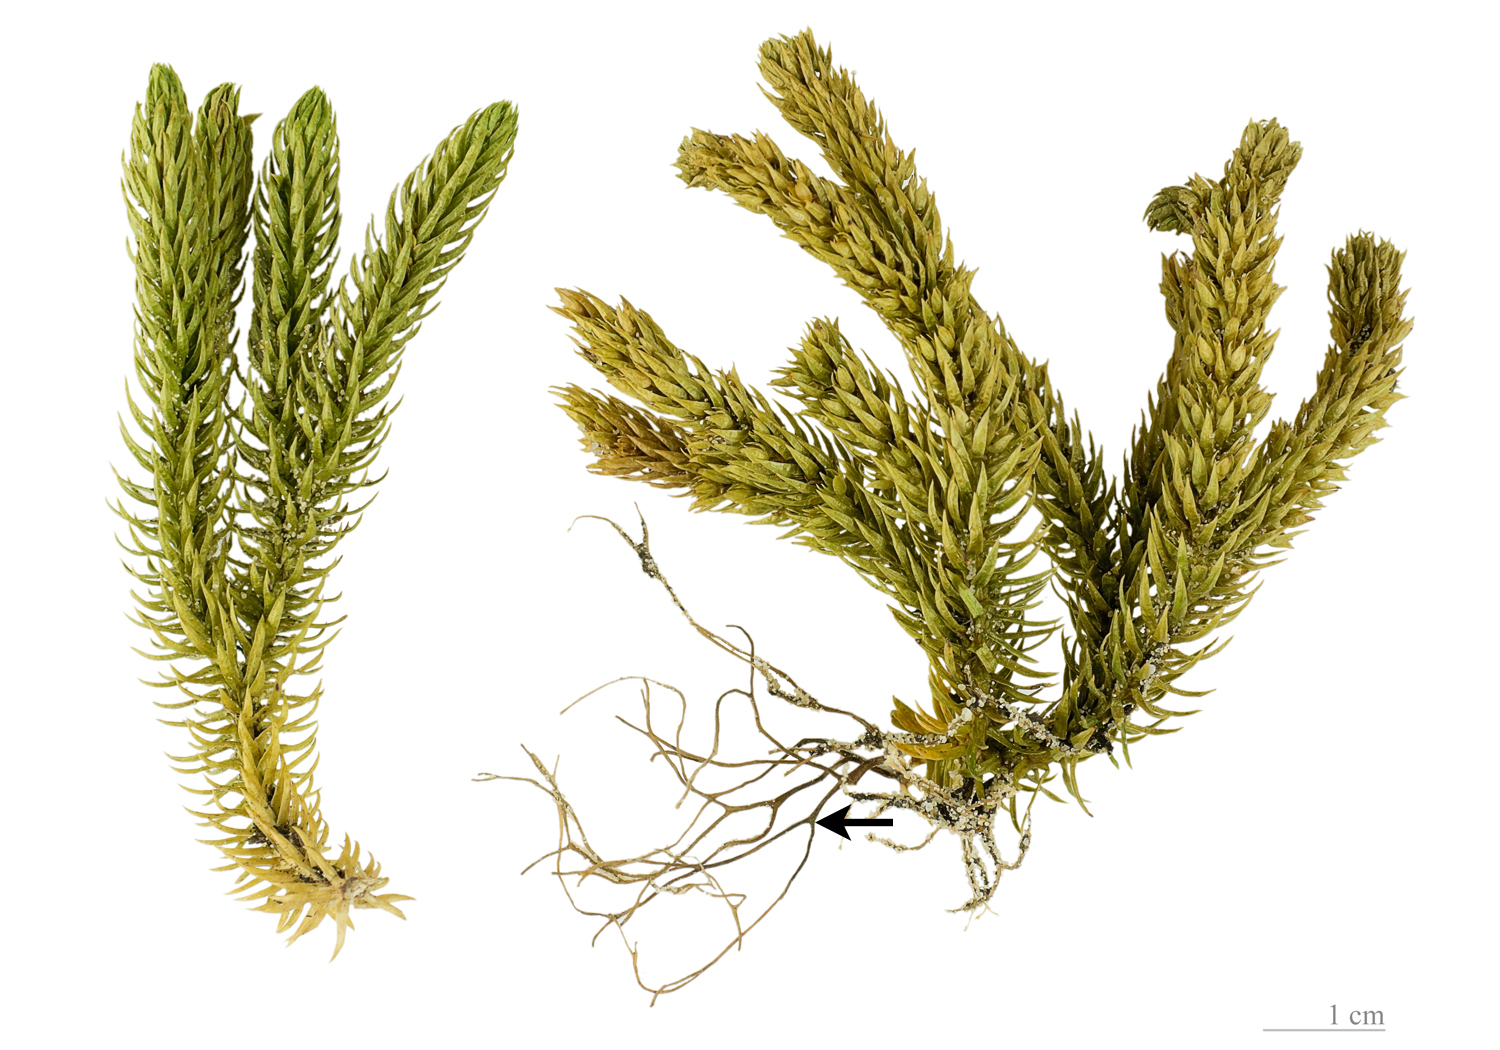 Photo of shining firmoss (a lycophyte), showing dichotomizing roots on one of the plants.